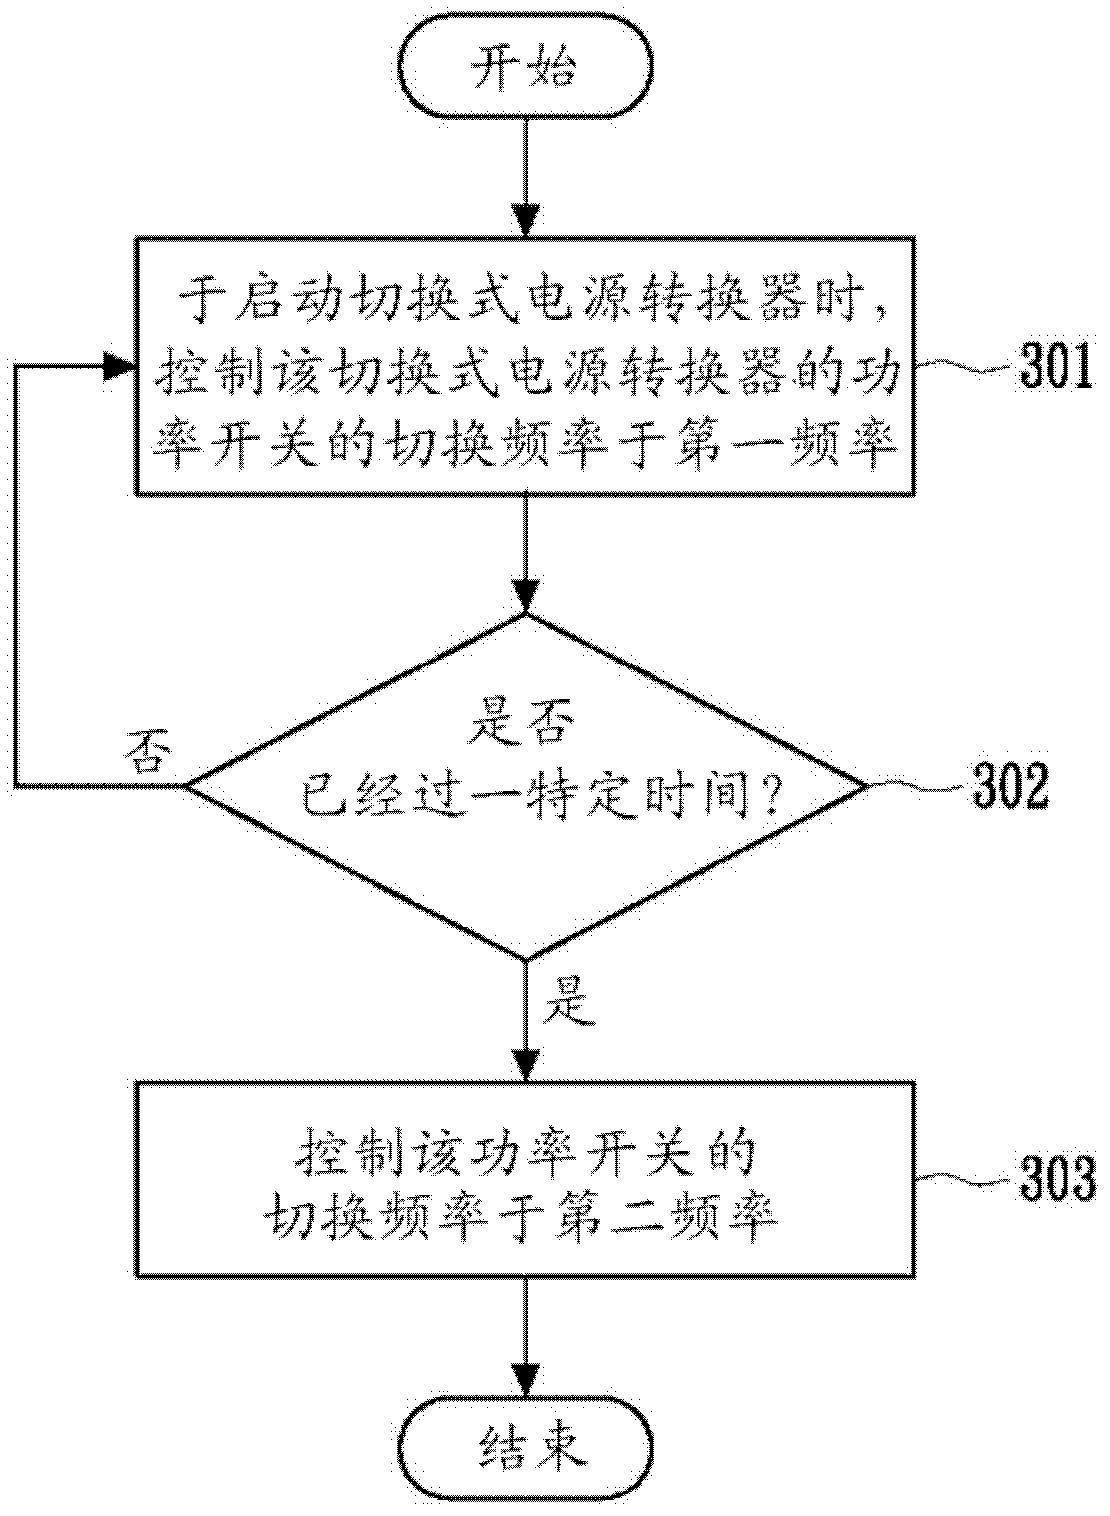 Method for controlling cross voltage of power switch of switching-type power converter, and circuit thereof